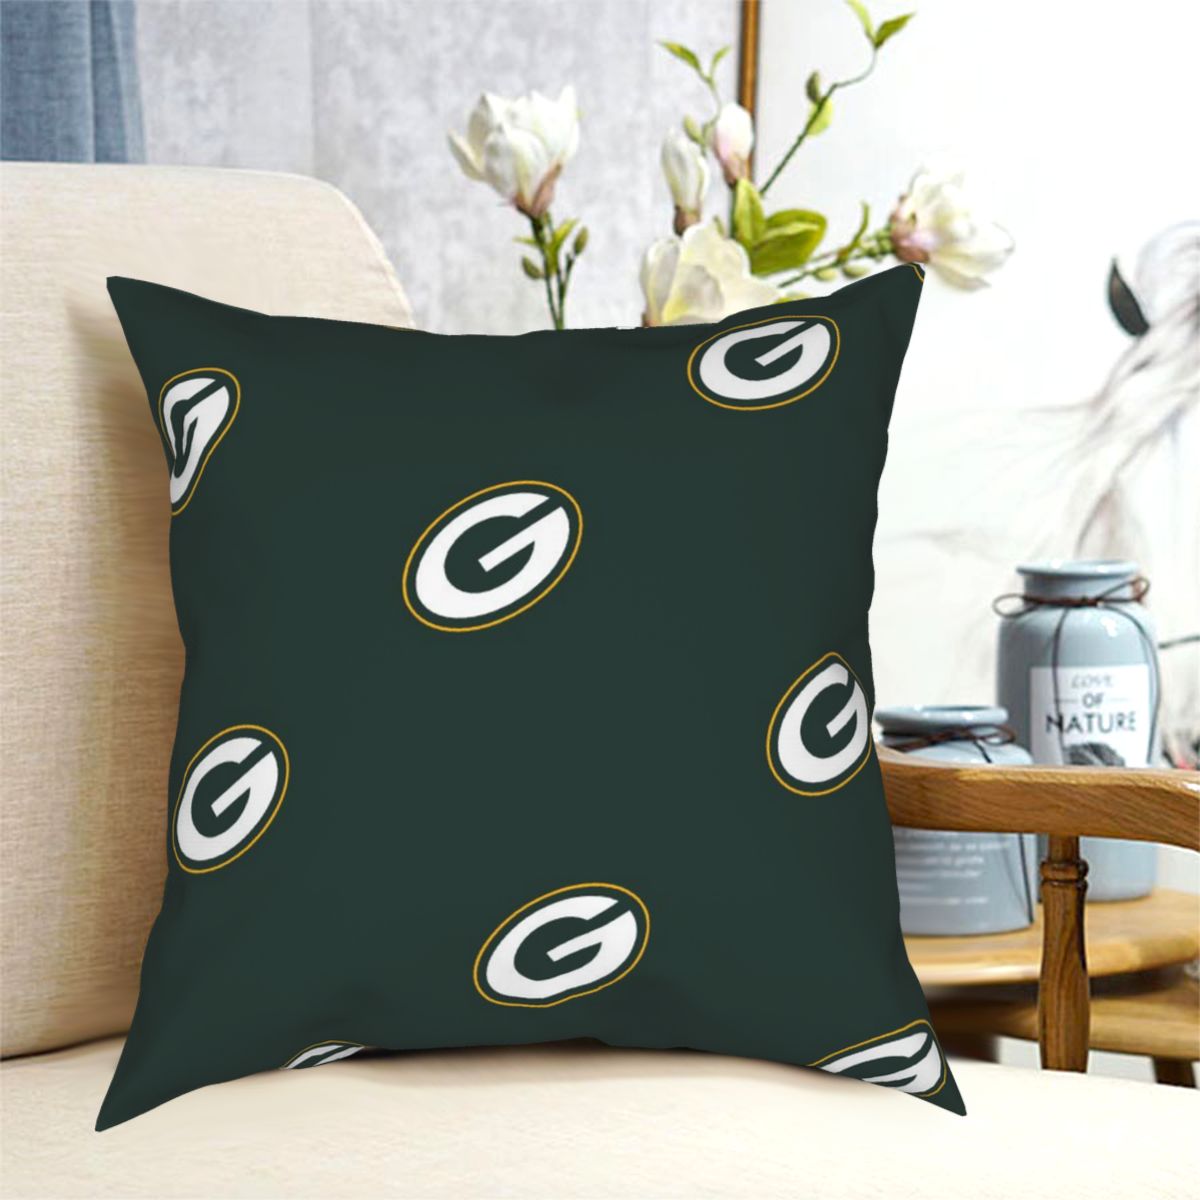 Custom Decorative Football Pillow Case Green Bay Packers Pillowcase Personalized Throw Pillow Covers